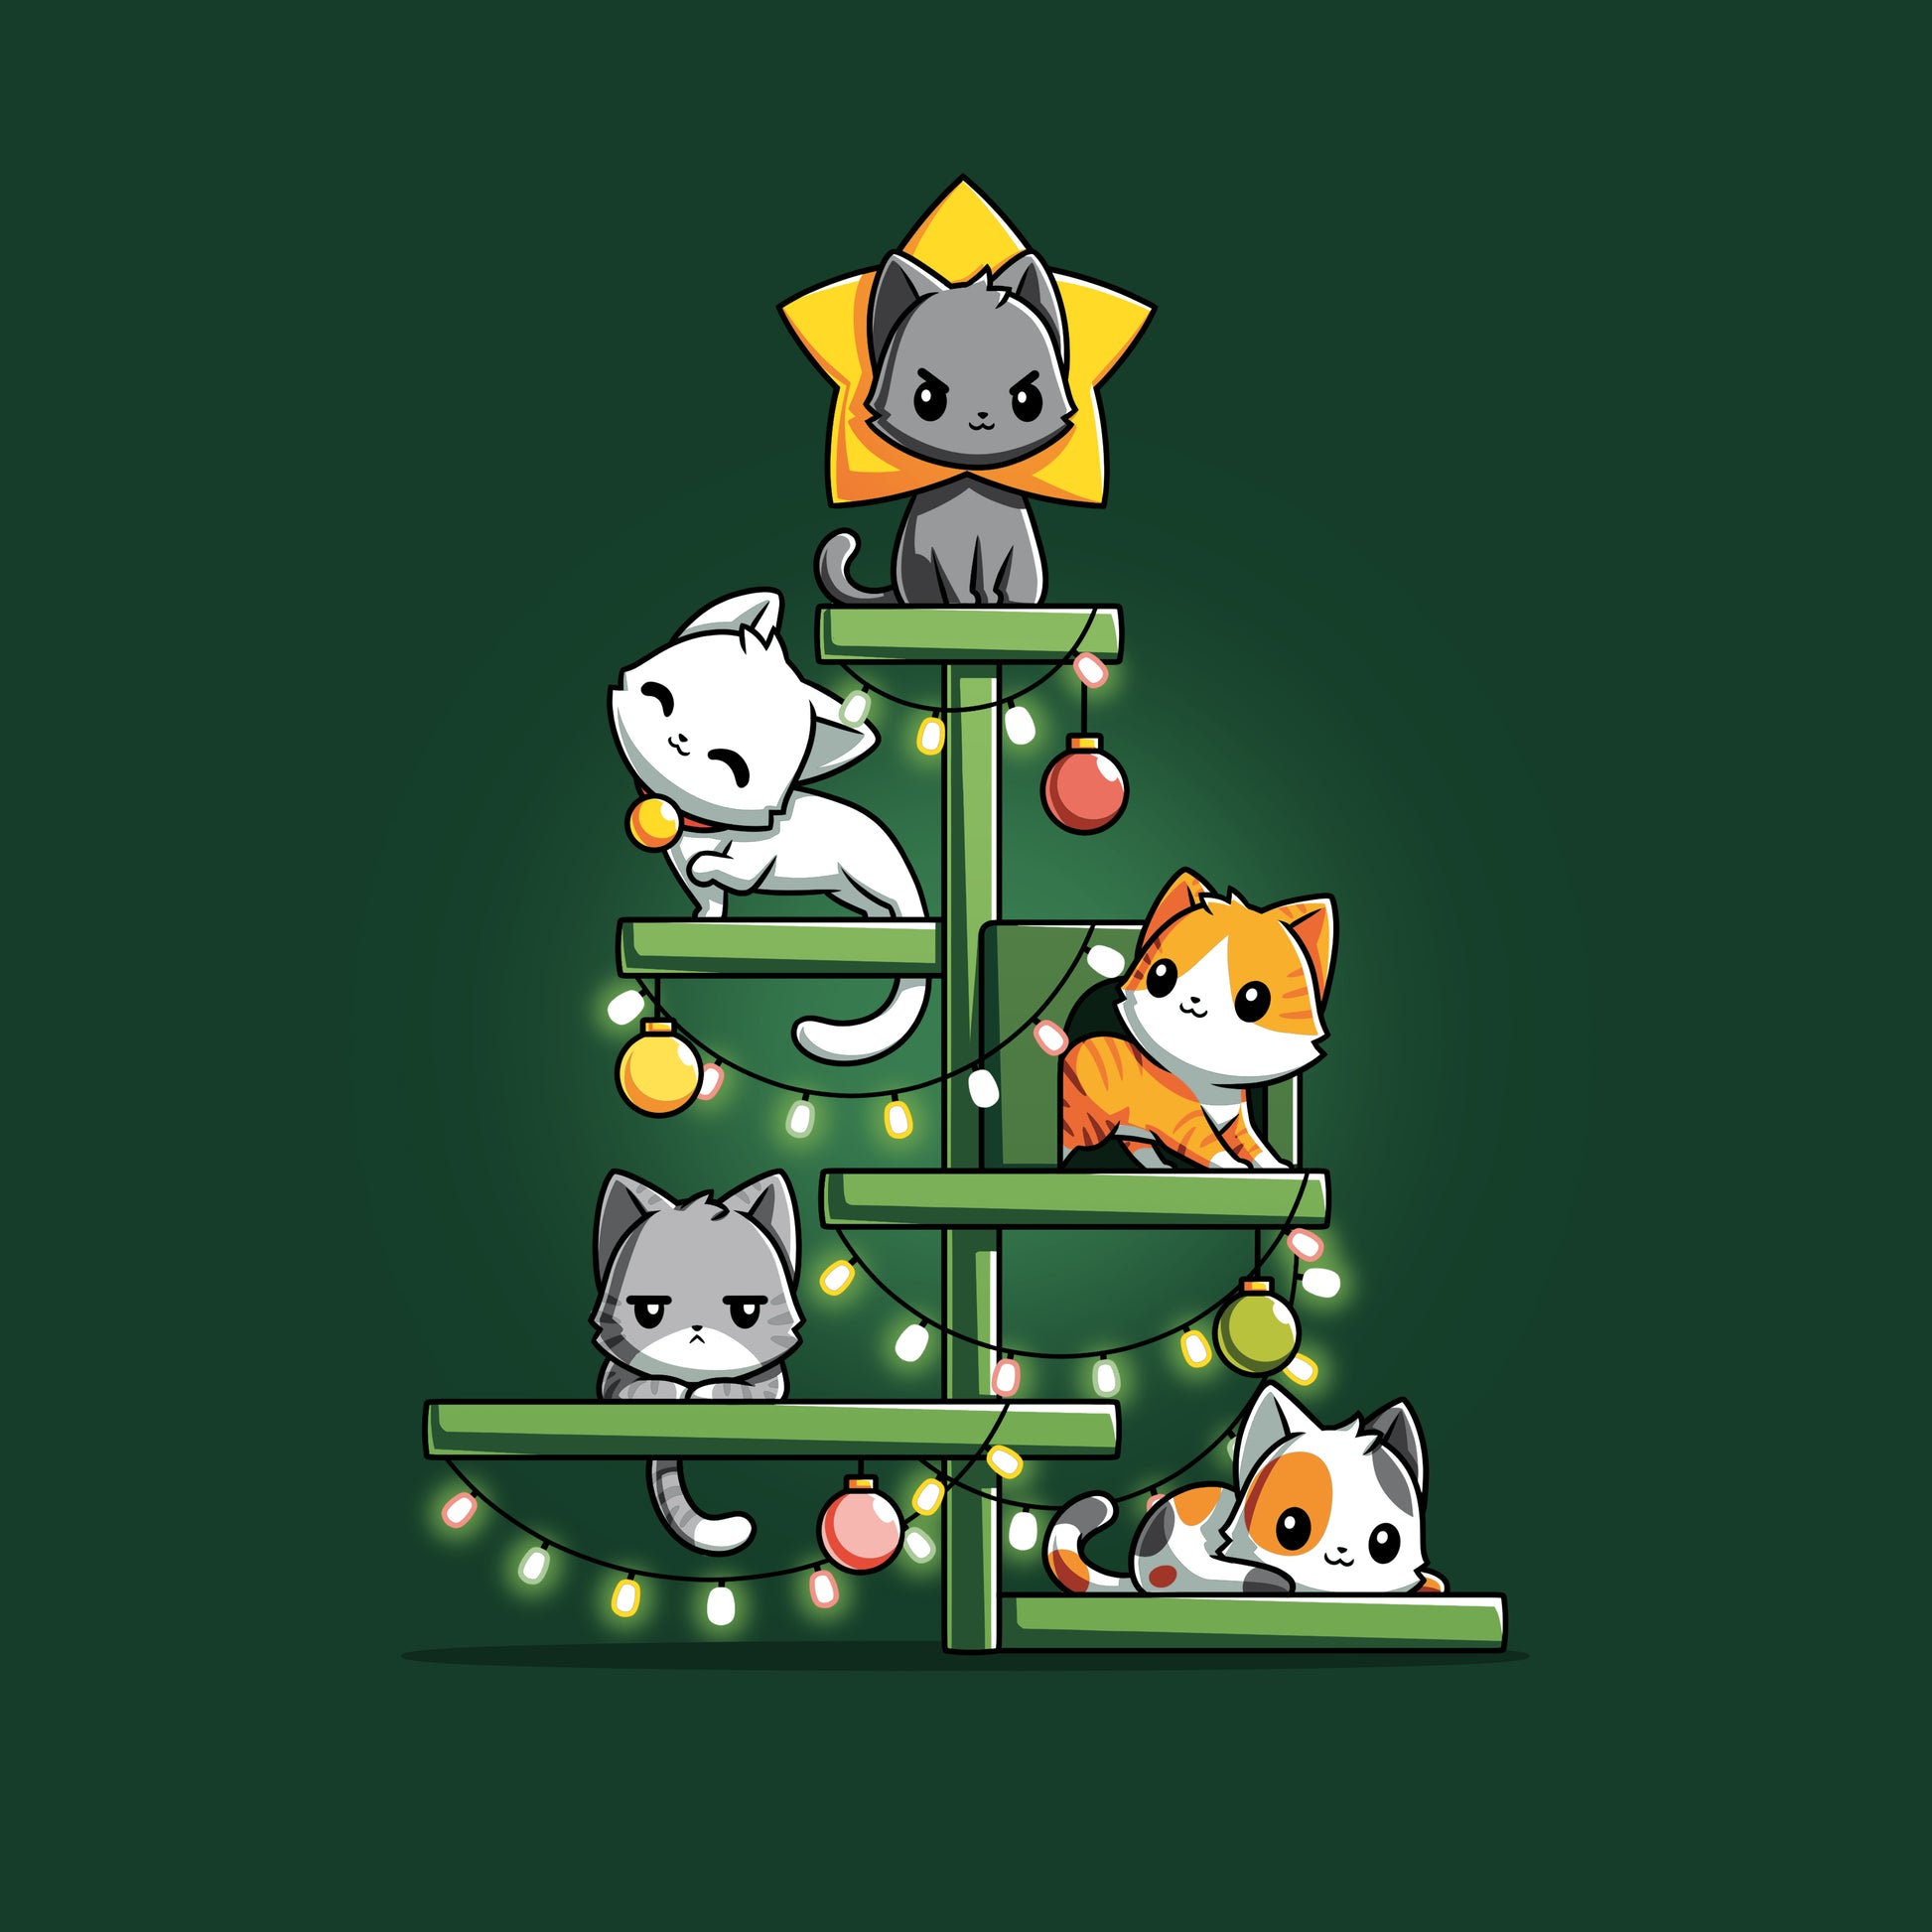 Illustration of five cats on a Christmas tree-shaped cat tower, decorated with ornaments and lights. Perfect for monsterdigital Kitty Christmas Tree shirts or a forest green T-shirt design!